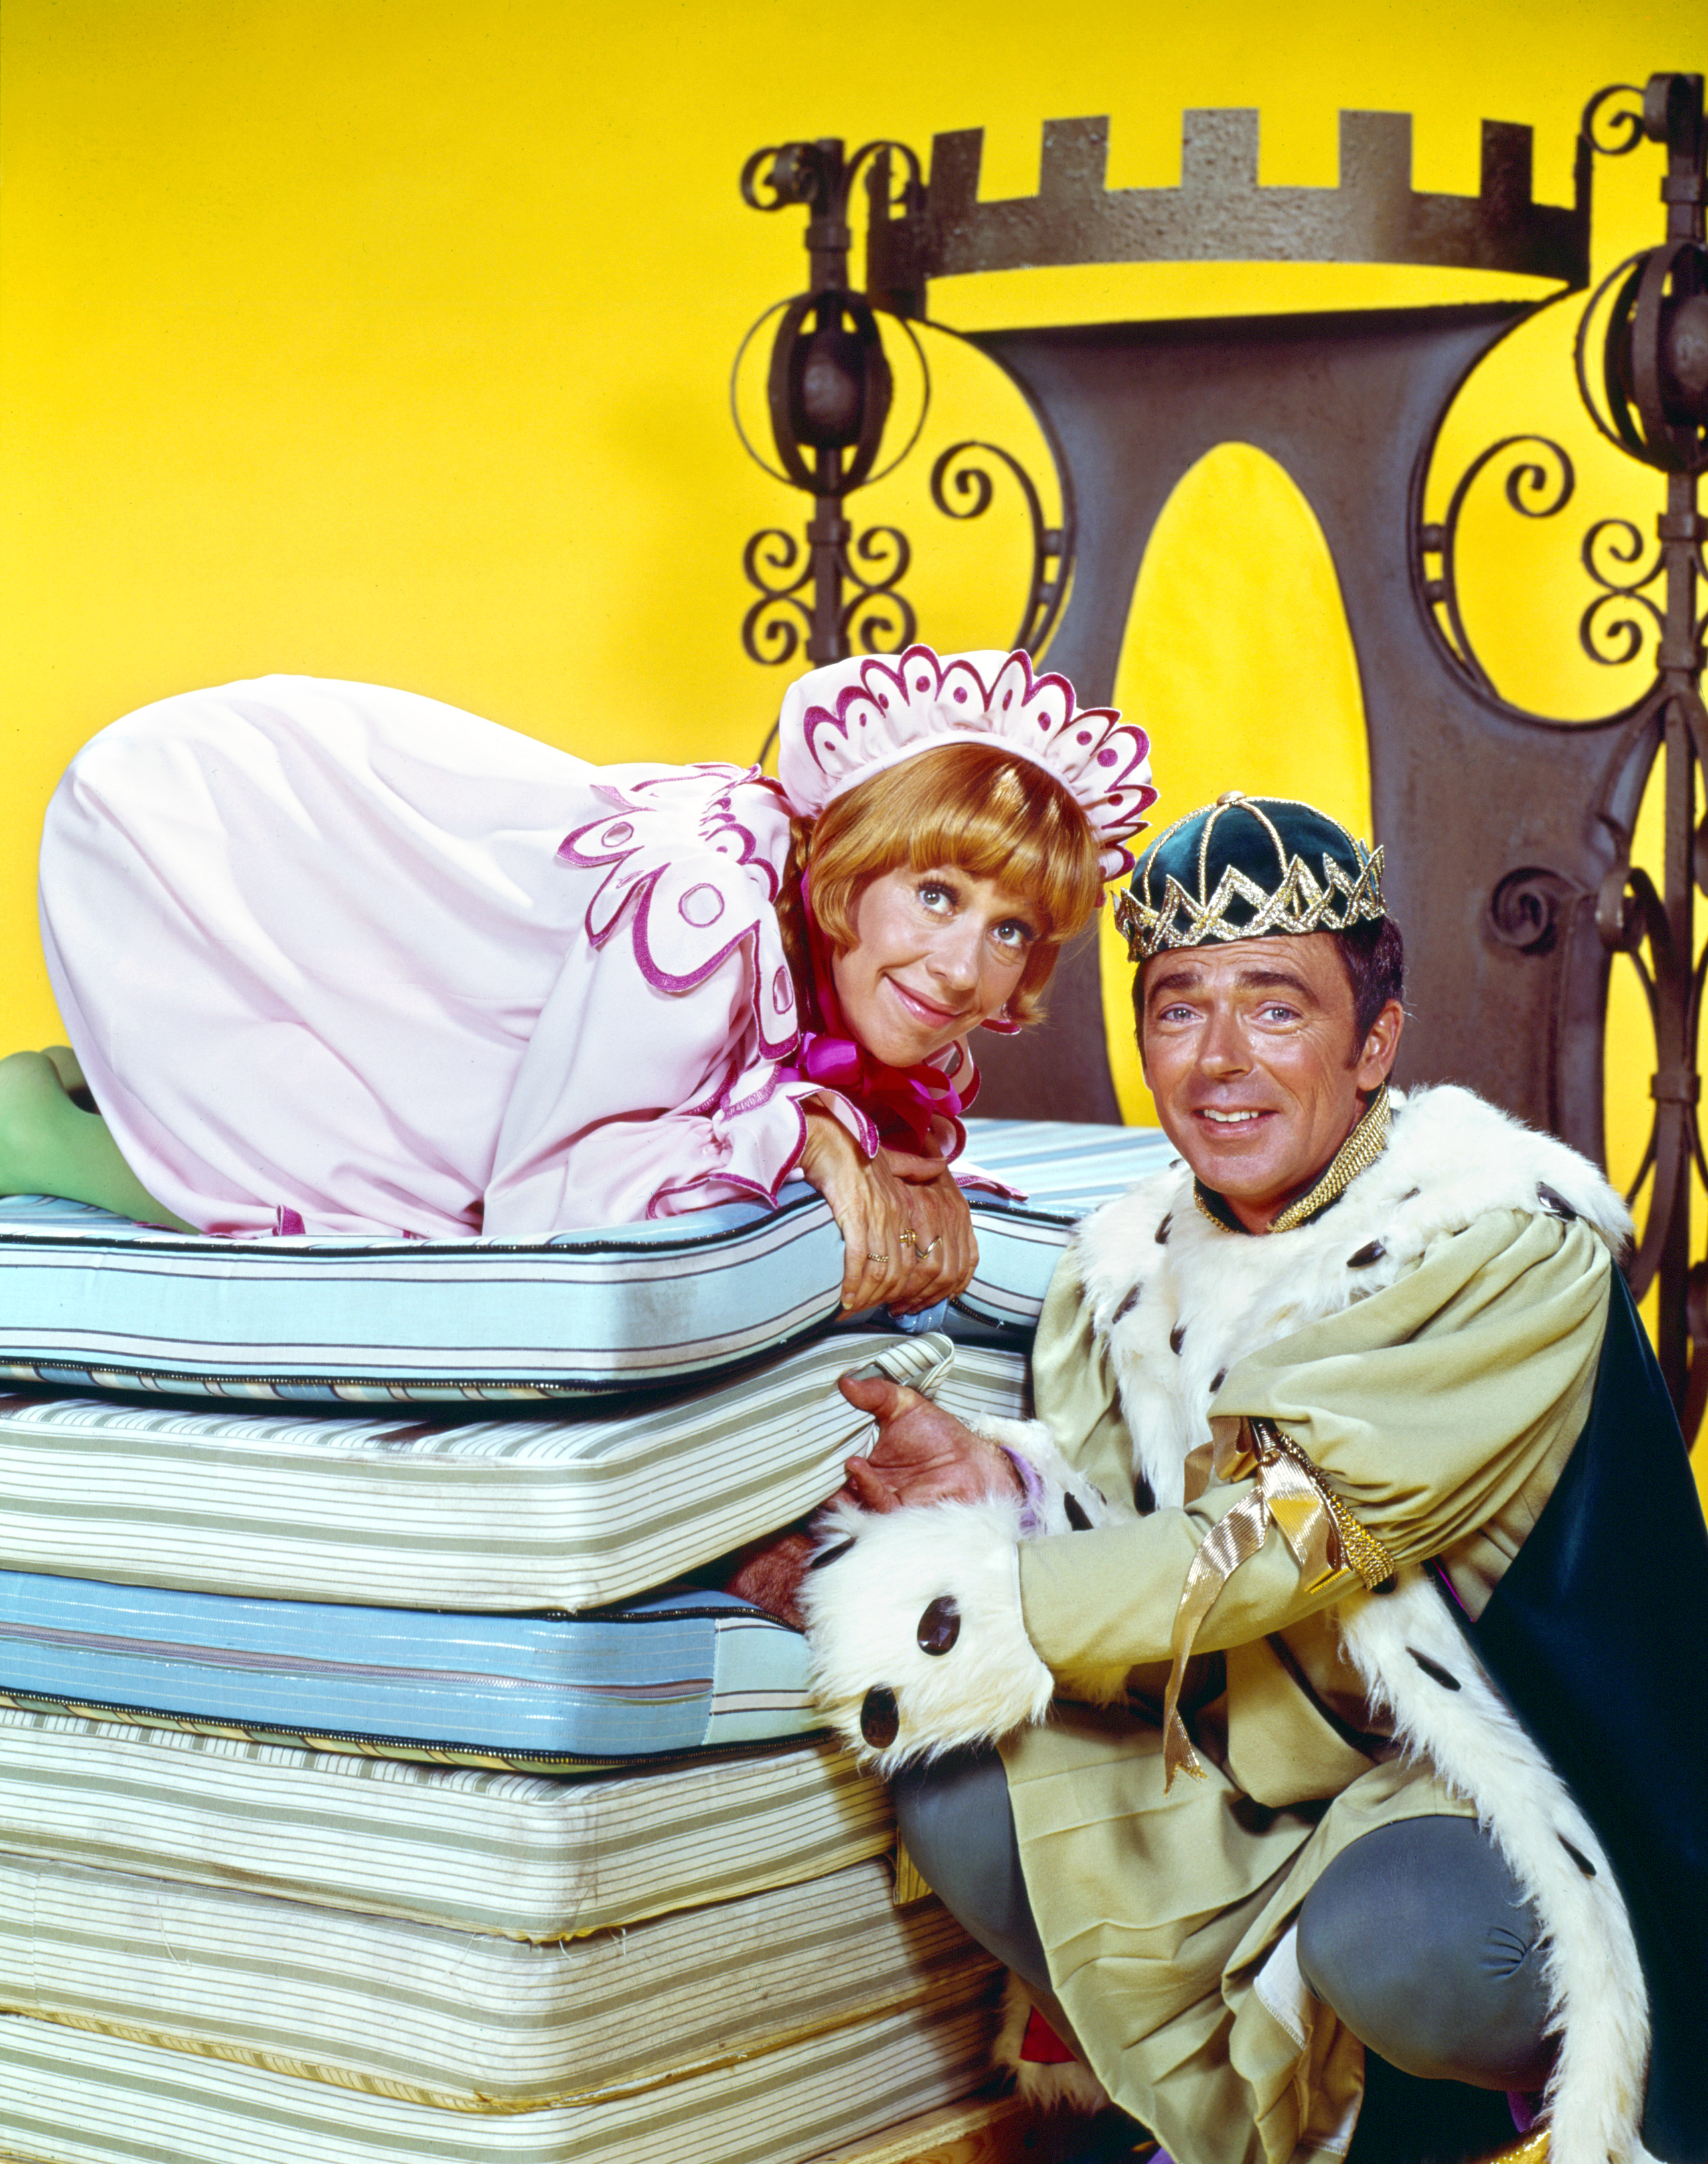 Carol Burnett (as Princess Winnifred Woebegone) and Ken Berry (as Dauntless the Drab) in the musical comedy special "Once Upon A Mattress" aired on December 12, 1972 | Source: Getty Images